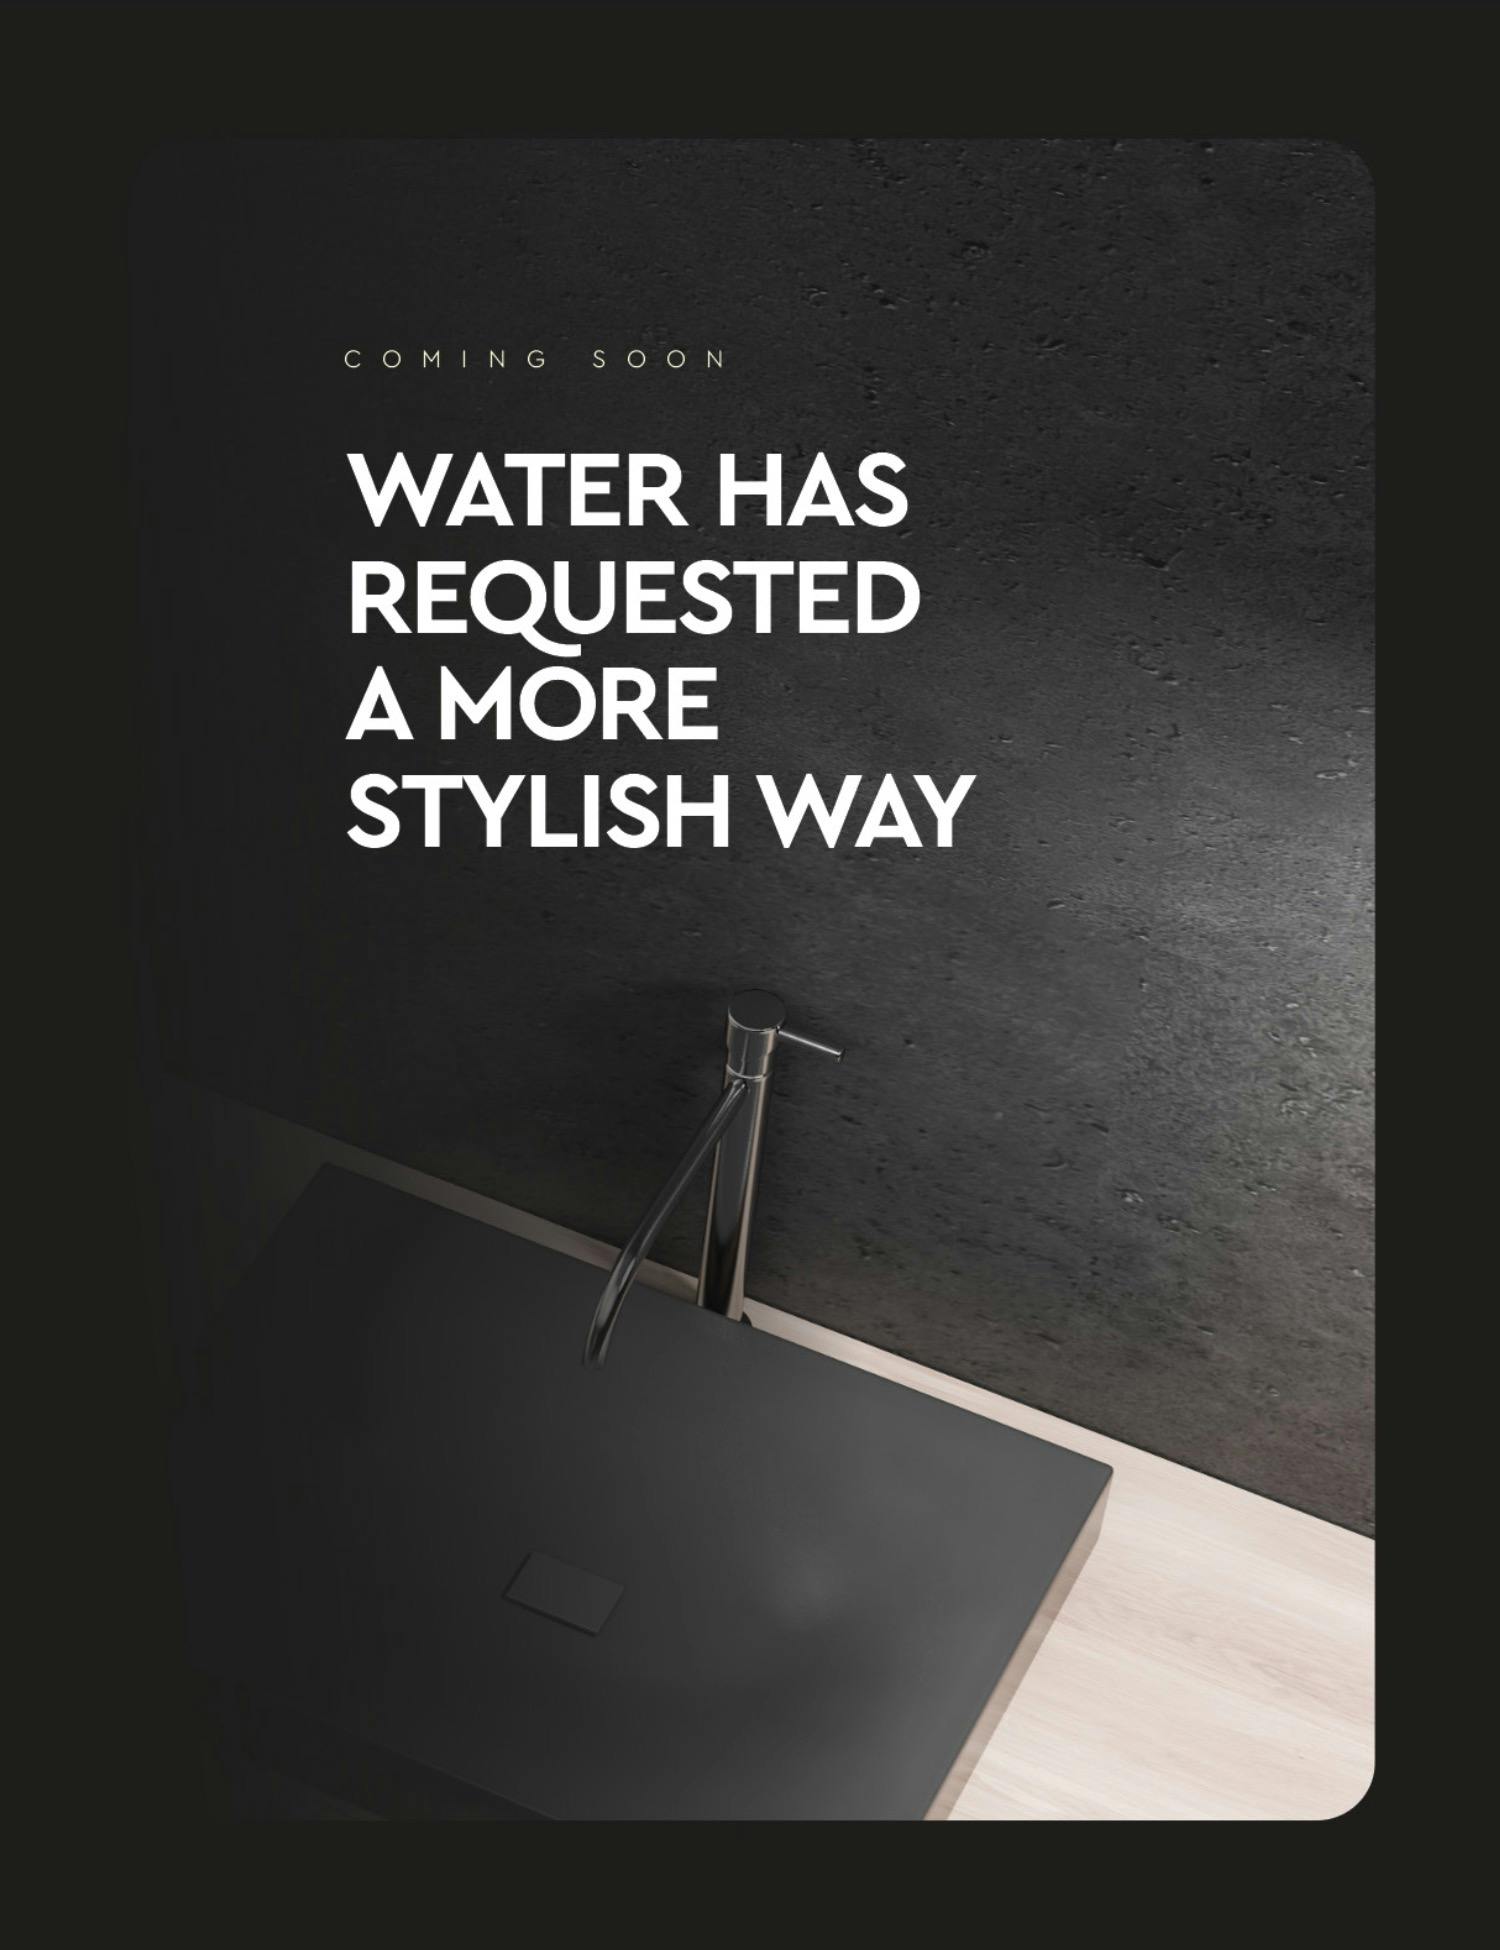 Advertisement saying: Water has requested a more stylish way.